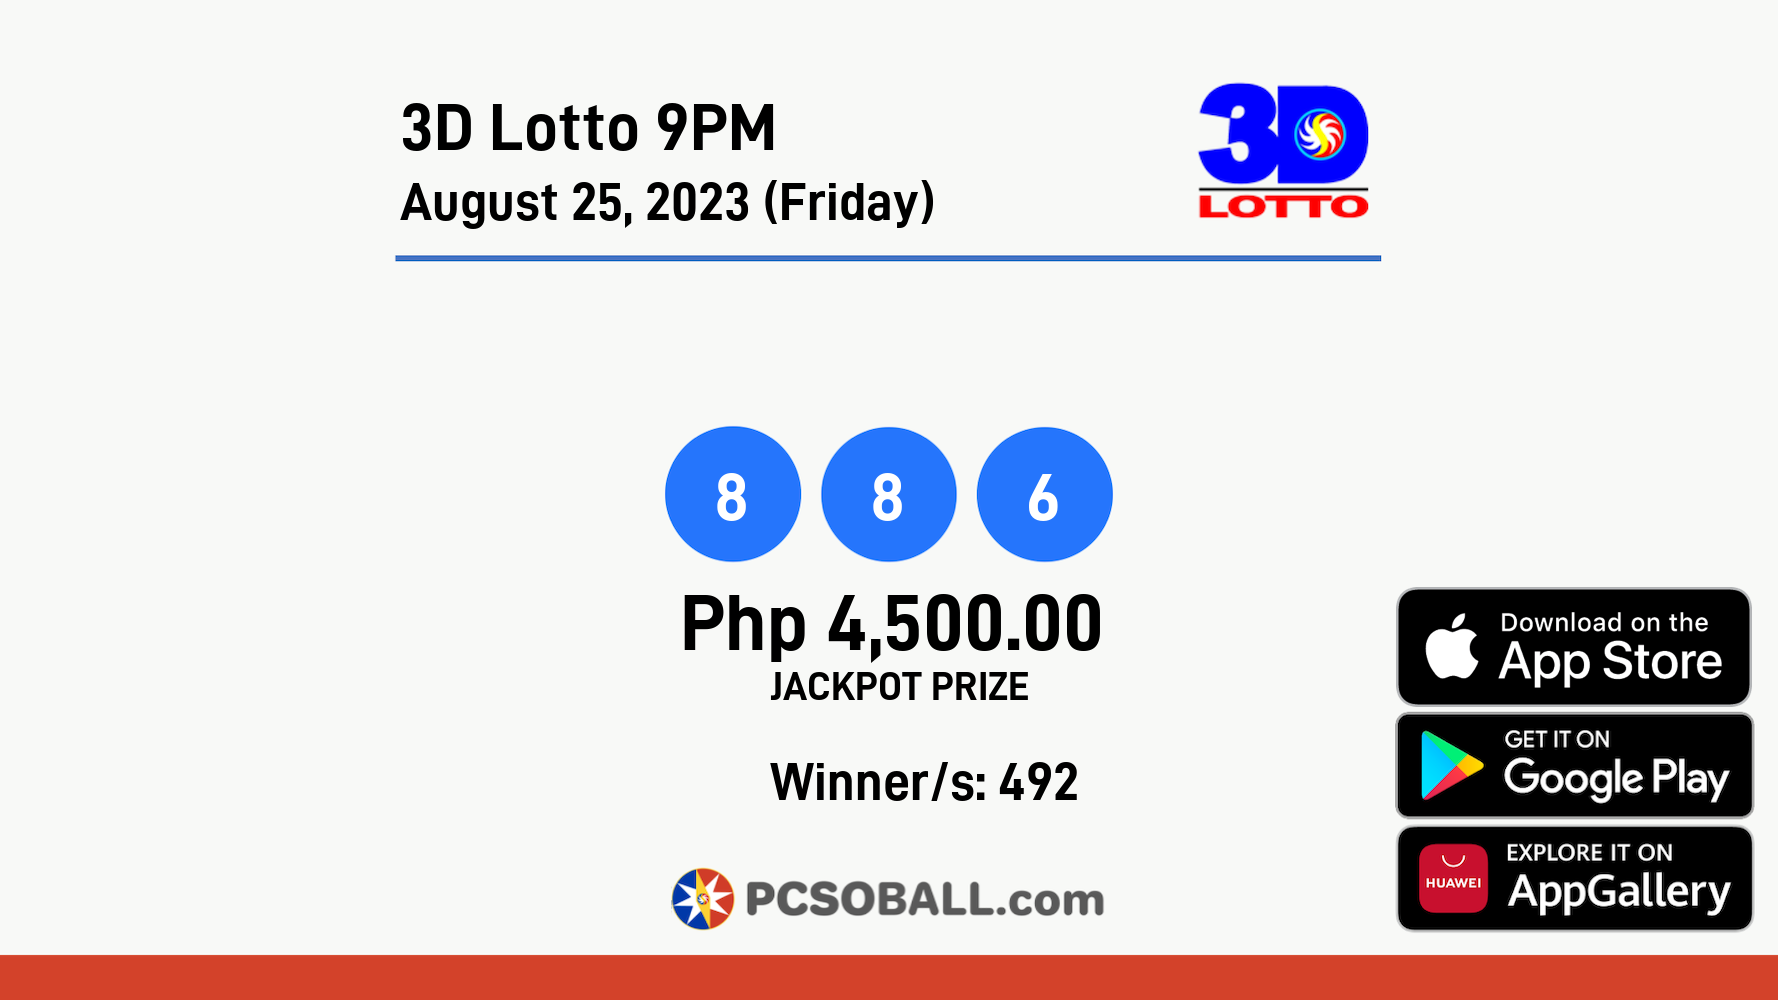 3D Lotto 9PM August 25, 2023 (Friday) Result